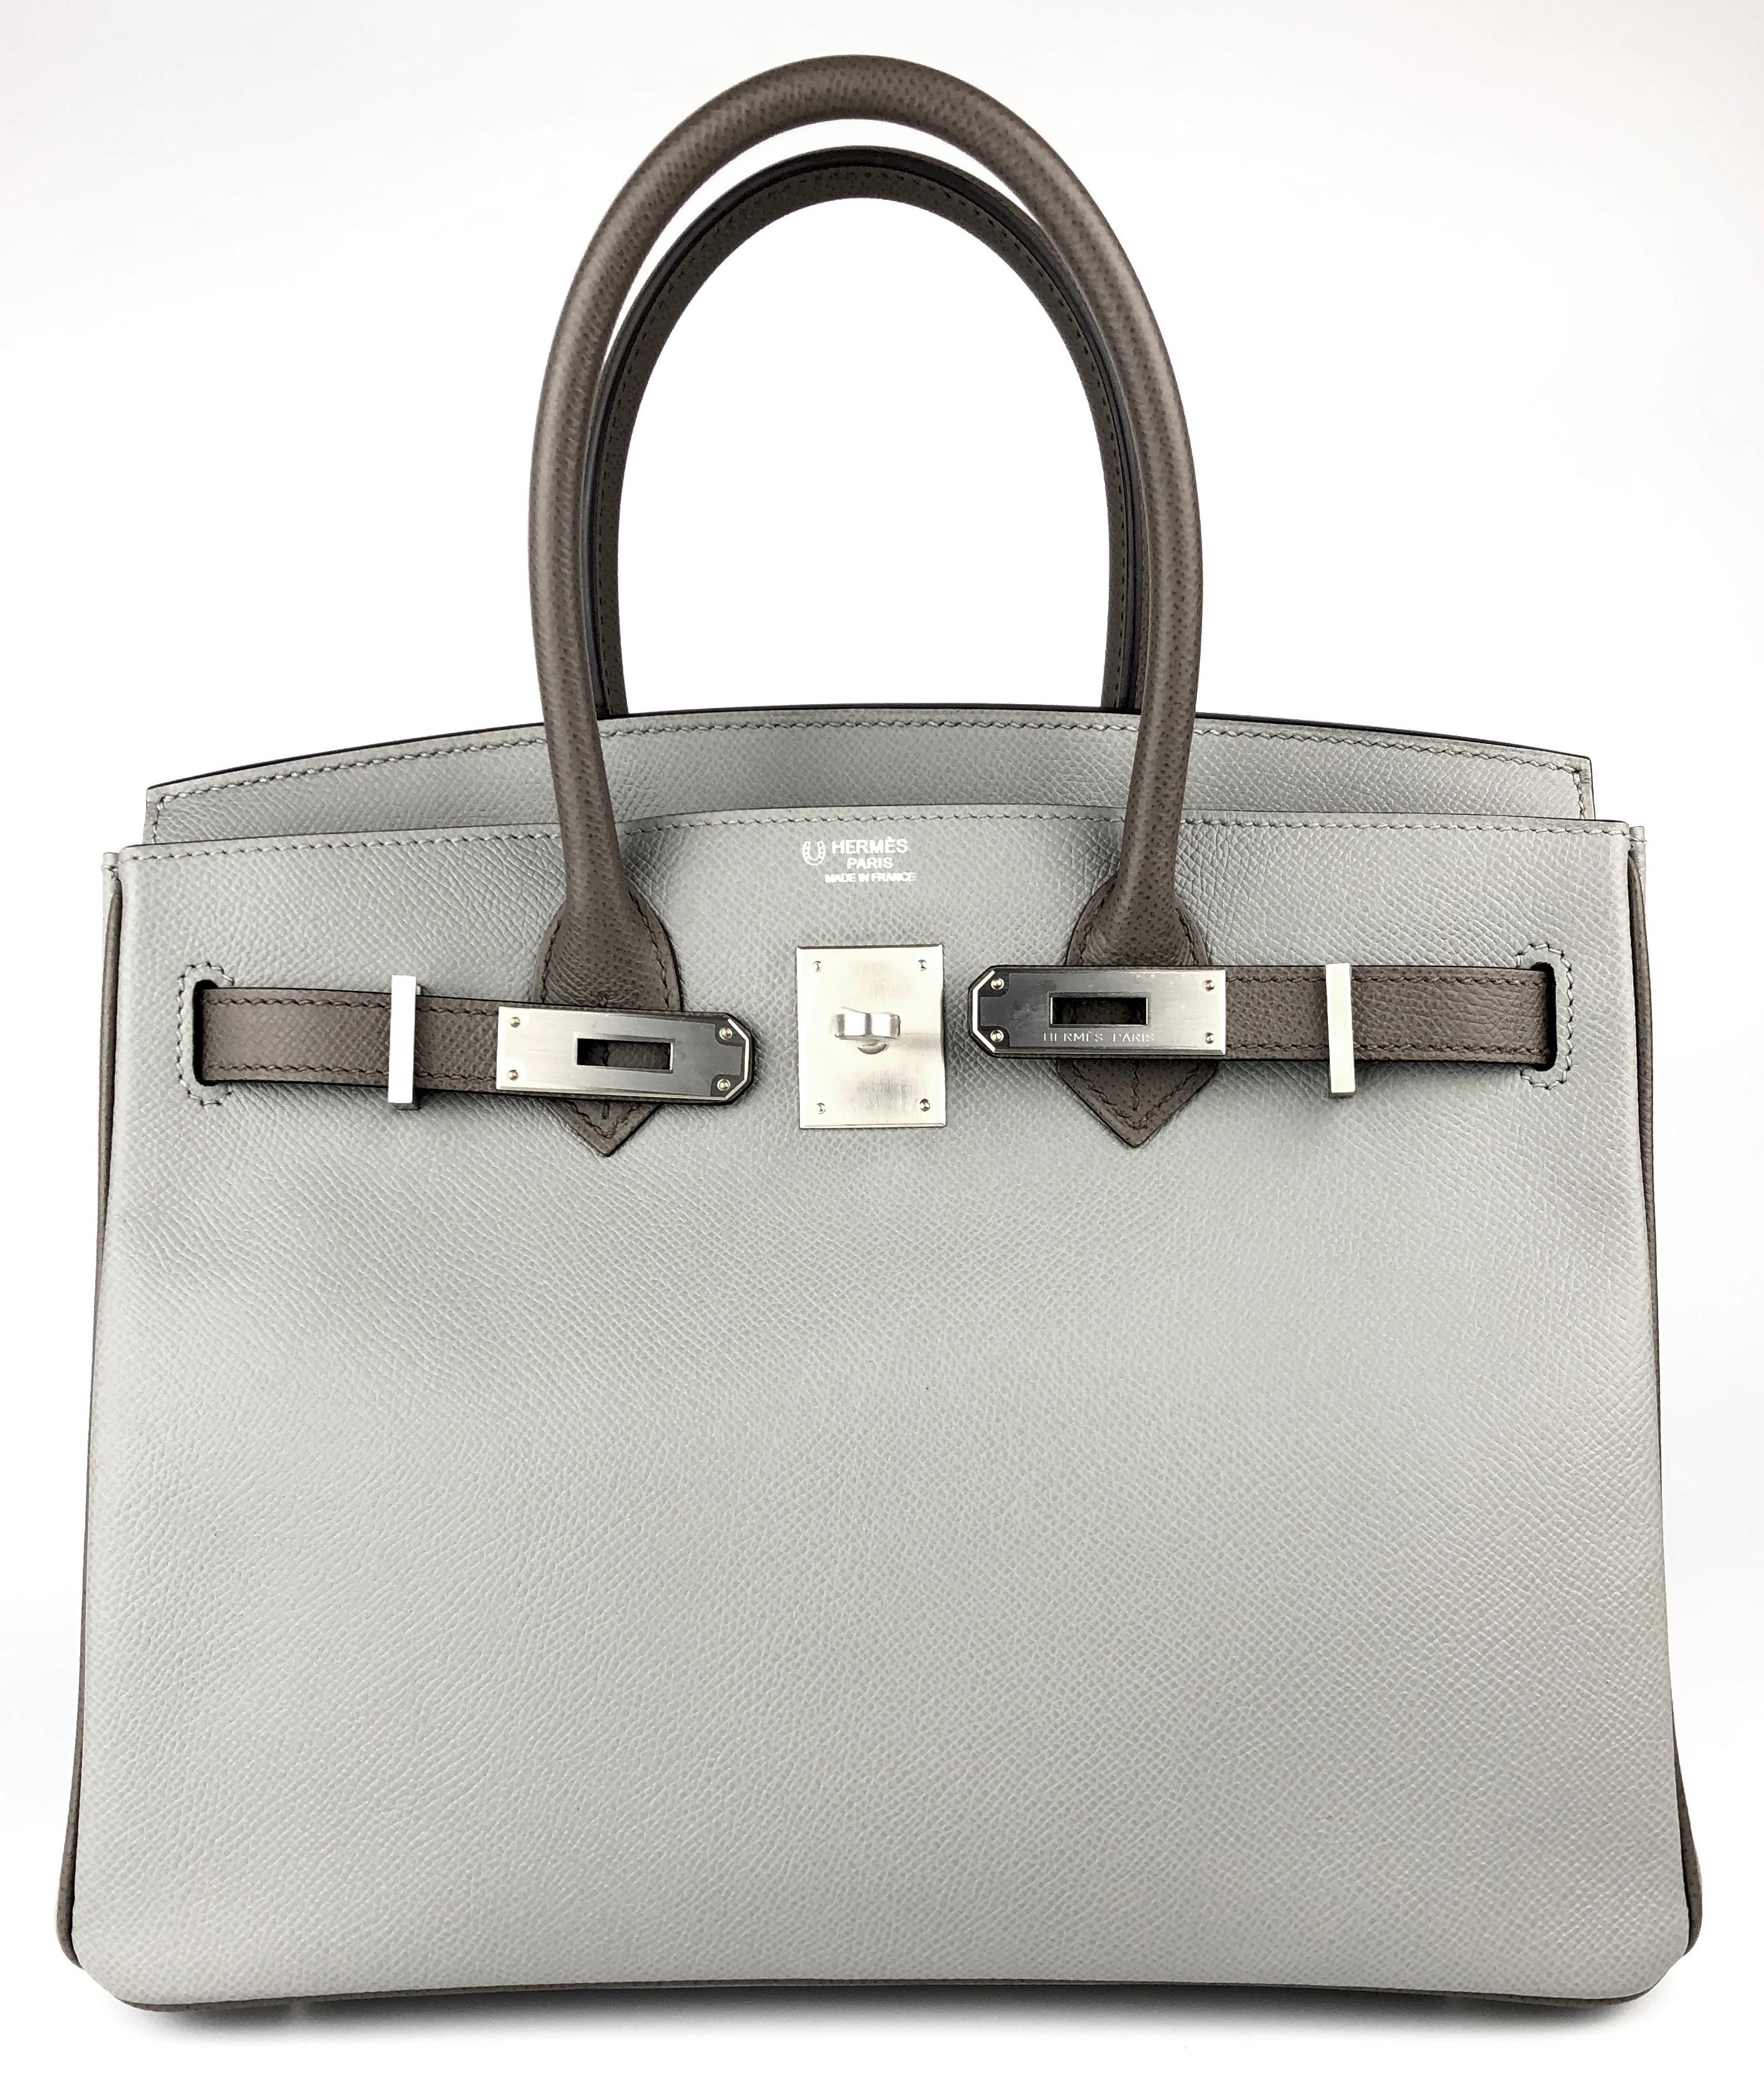 Stunning Pristine 1 of 1 HSS Special Order Hermes Birkin 30 Gris Mouette & Etain Gray Complimented by Brushed Palladium Hardware. From a collectors Closet, Only Worn 2 Times. Plastic on all Hardware and Feet. 

Shop with confidence from Lux Addicts.